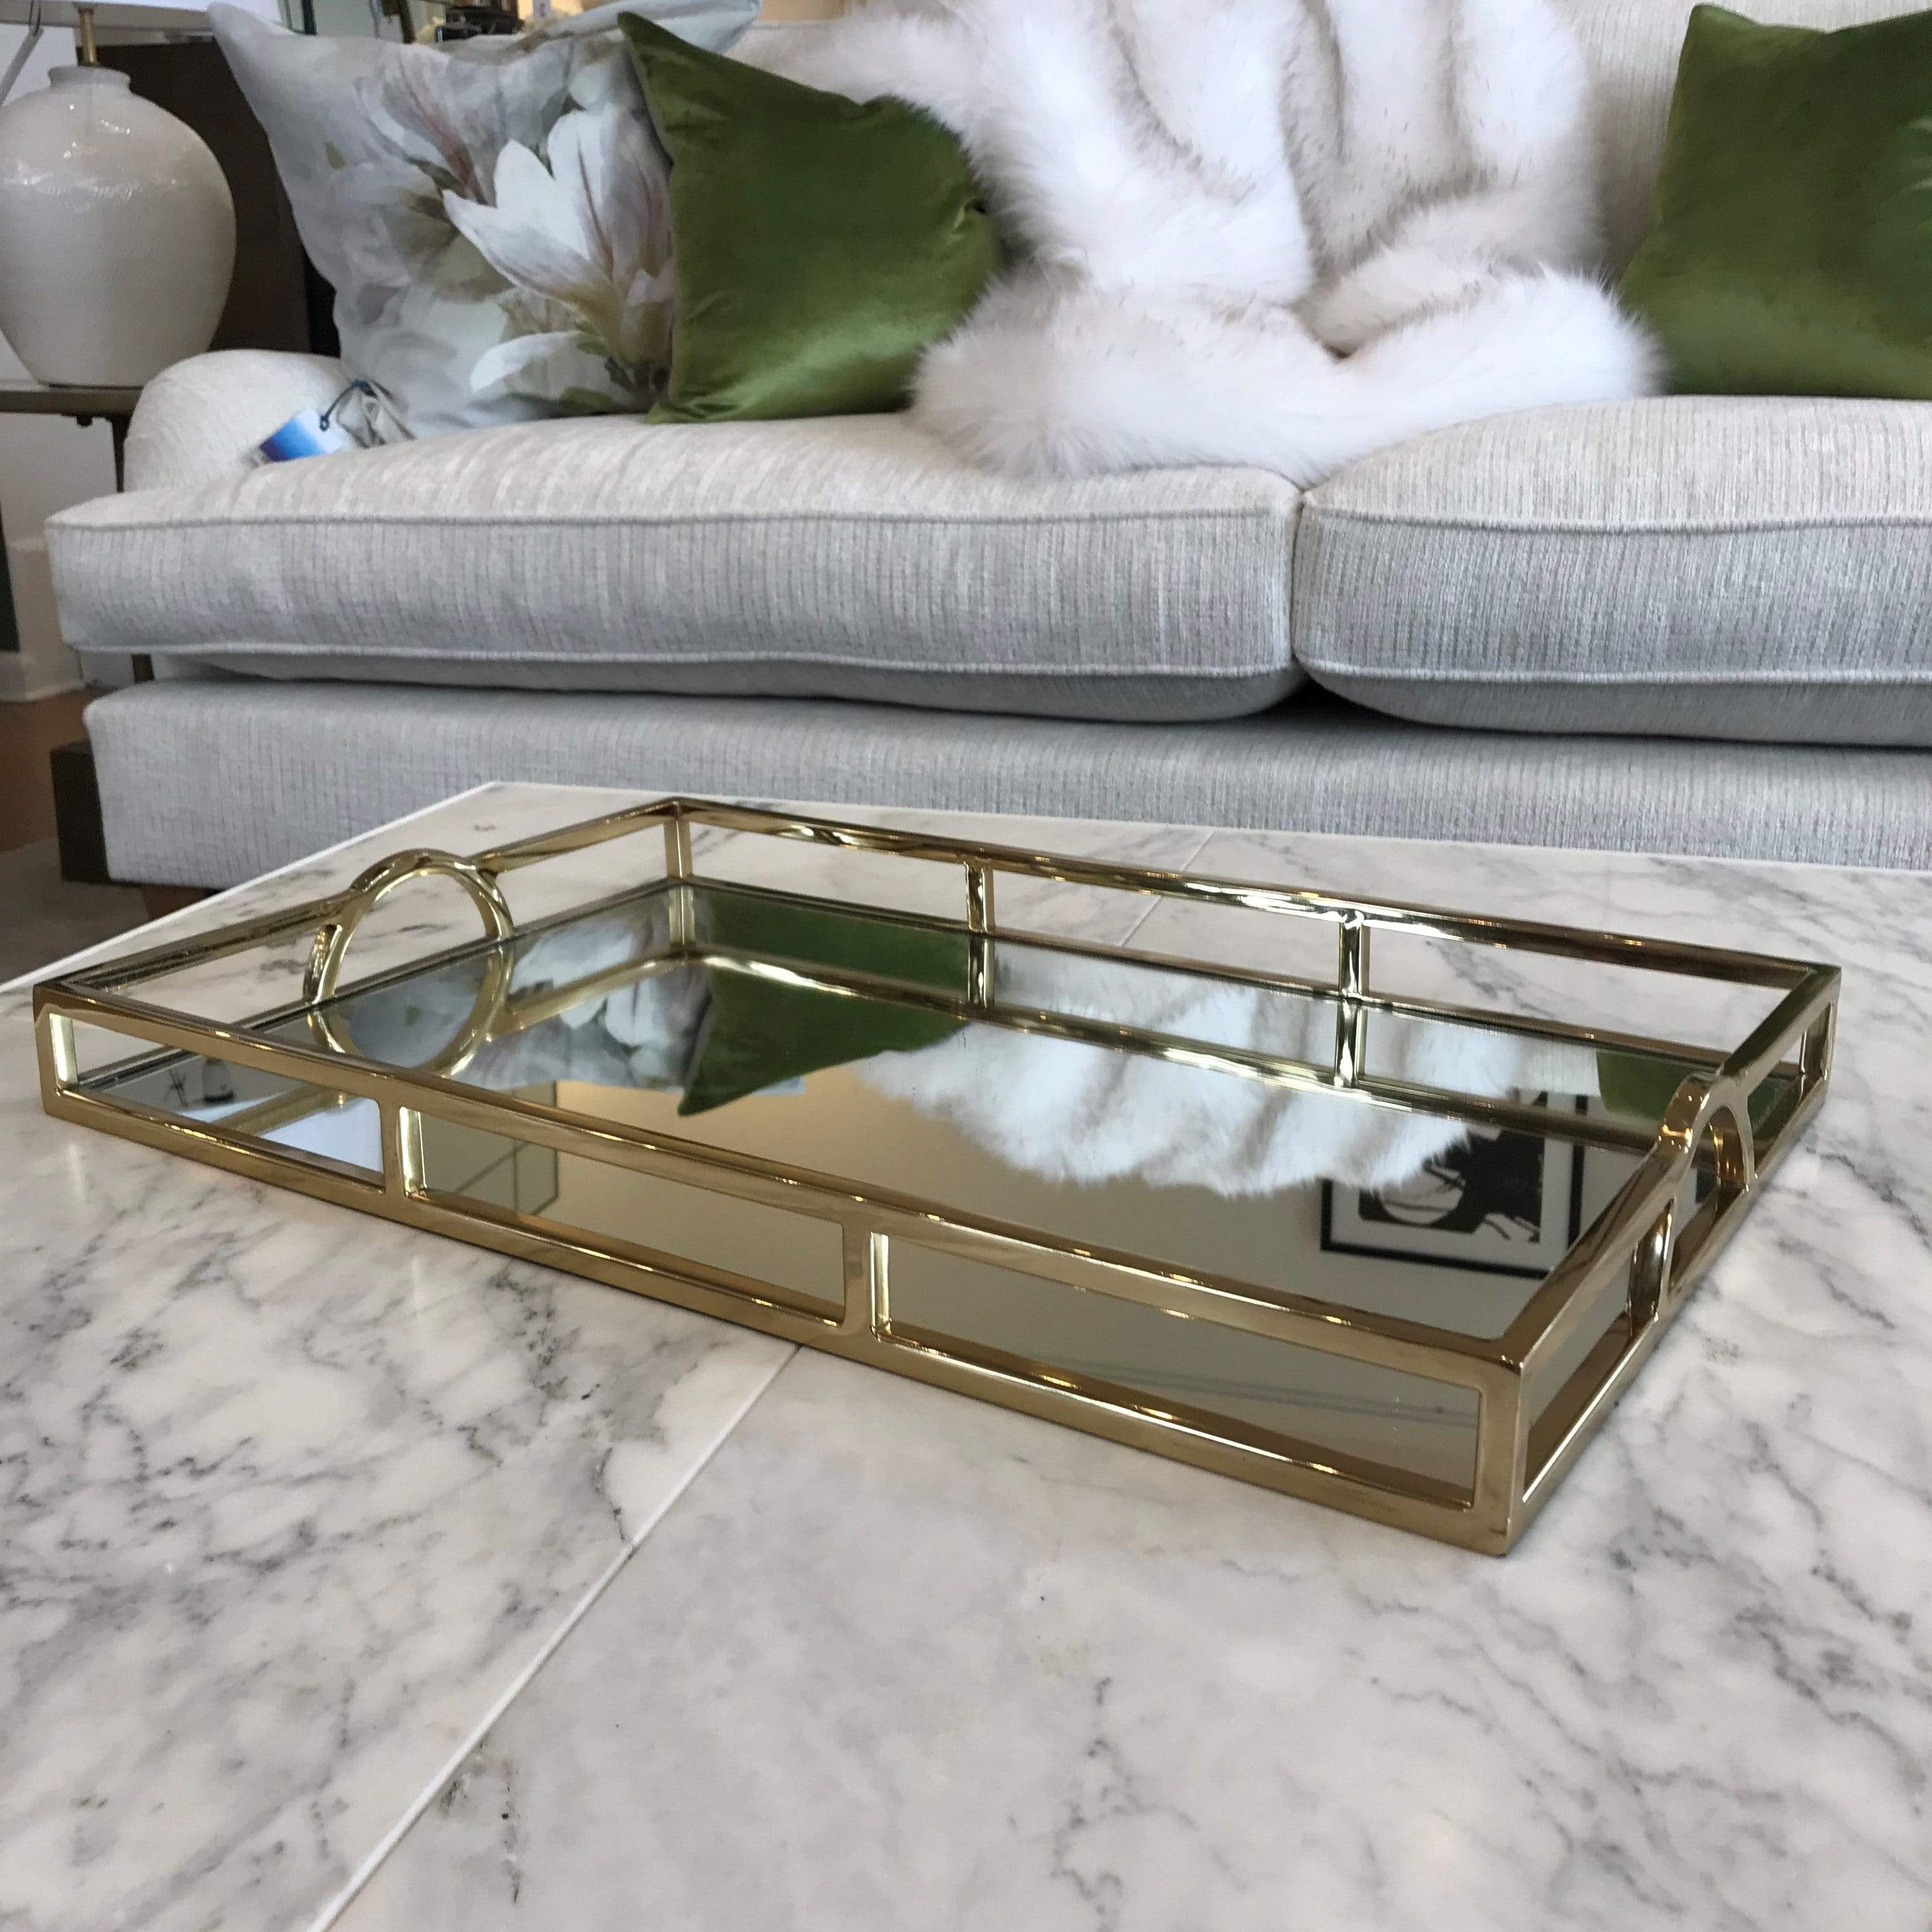 Gaudion Furniture Tray Gold Mirror Tray Tray Mirrored Gold